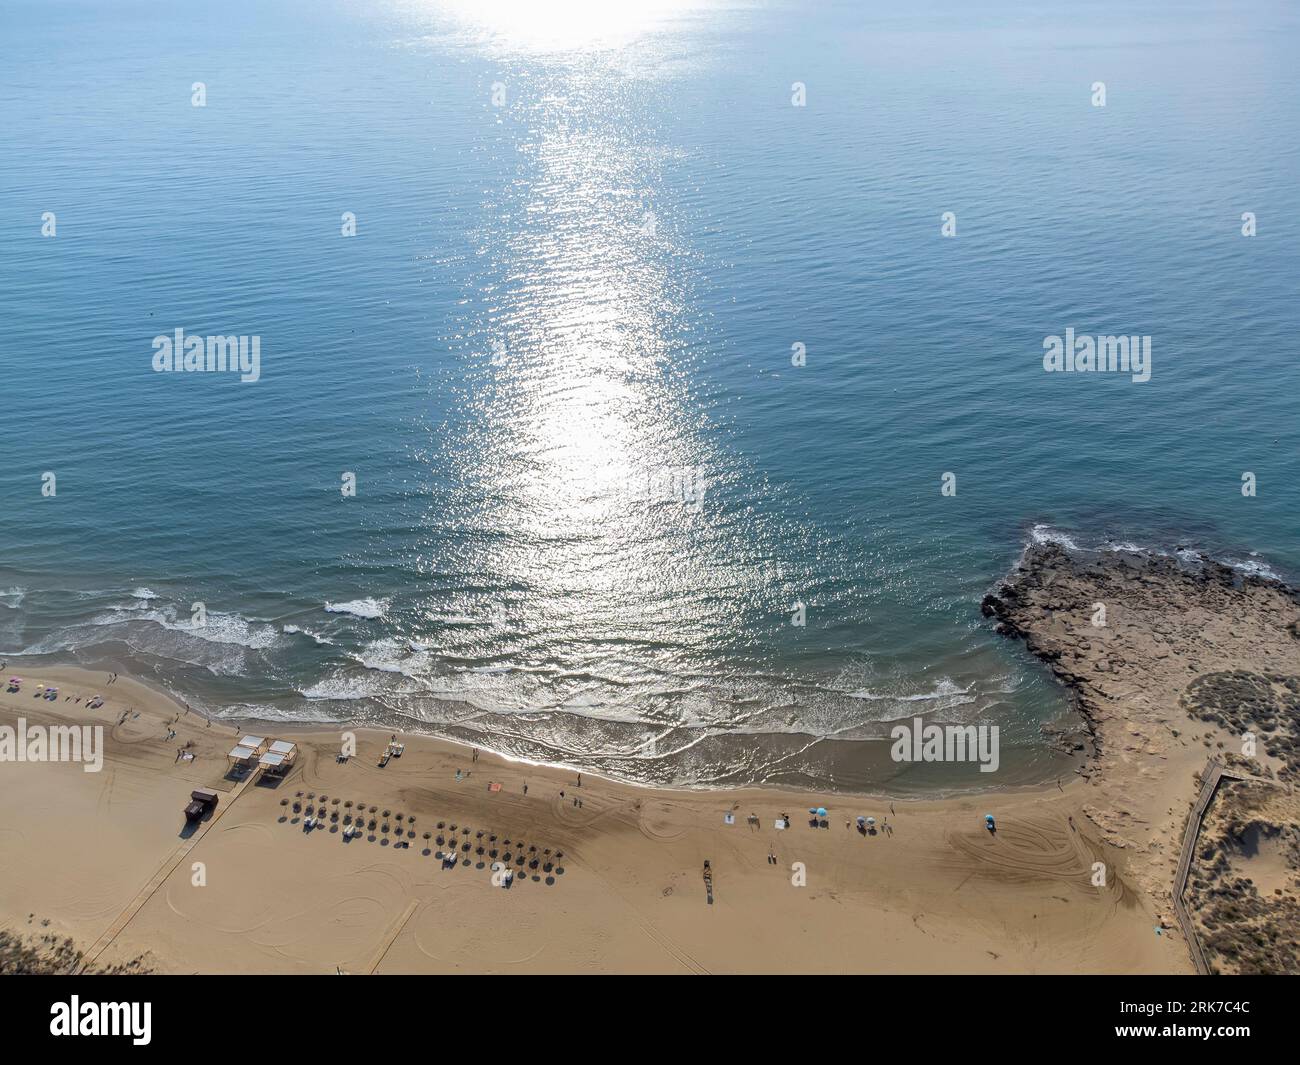 with the reflection of the sun on the turquoise waters in the early morning hours, Alcossebre beach, horizontal Stock Photo